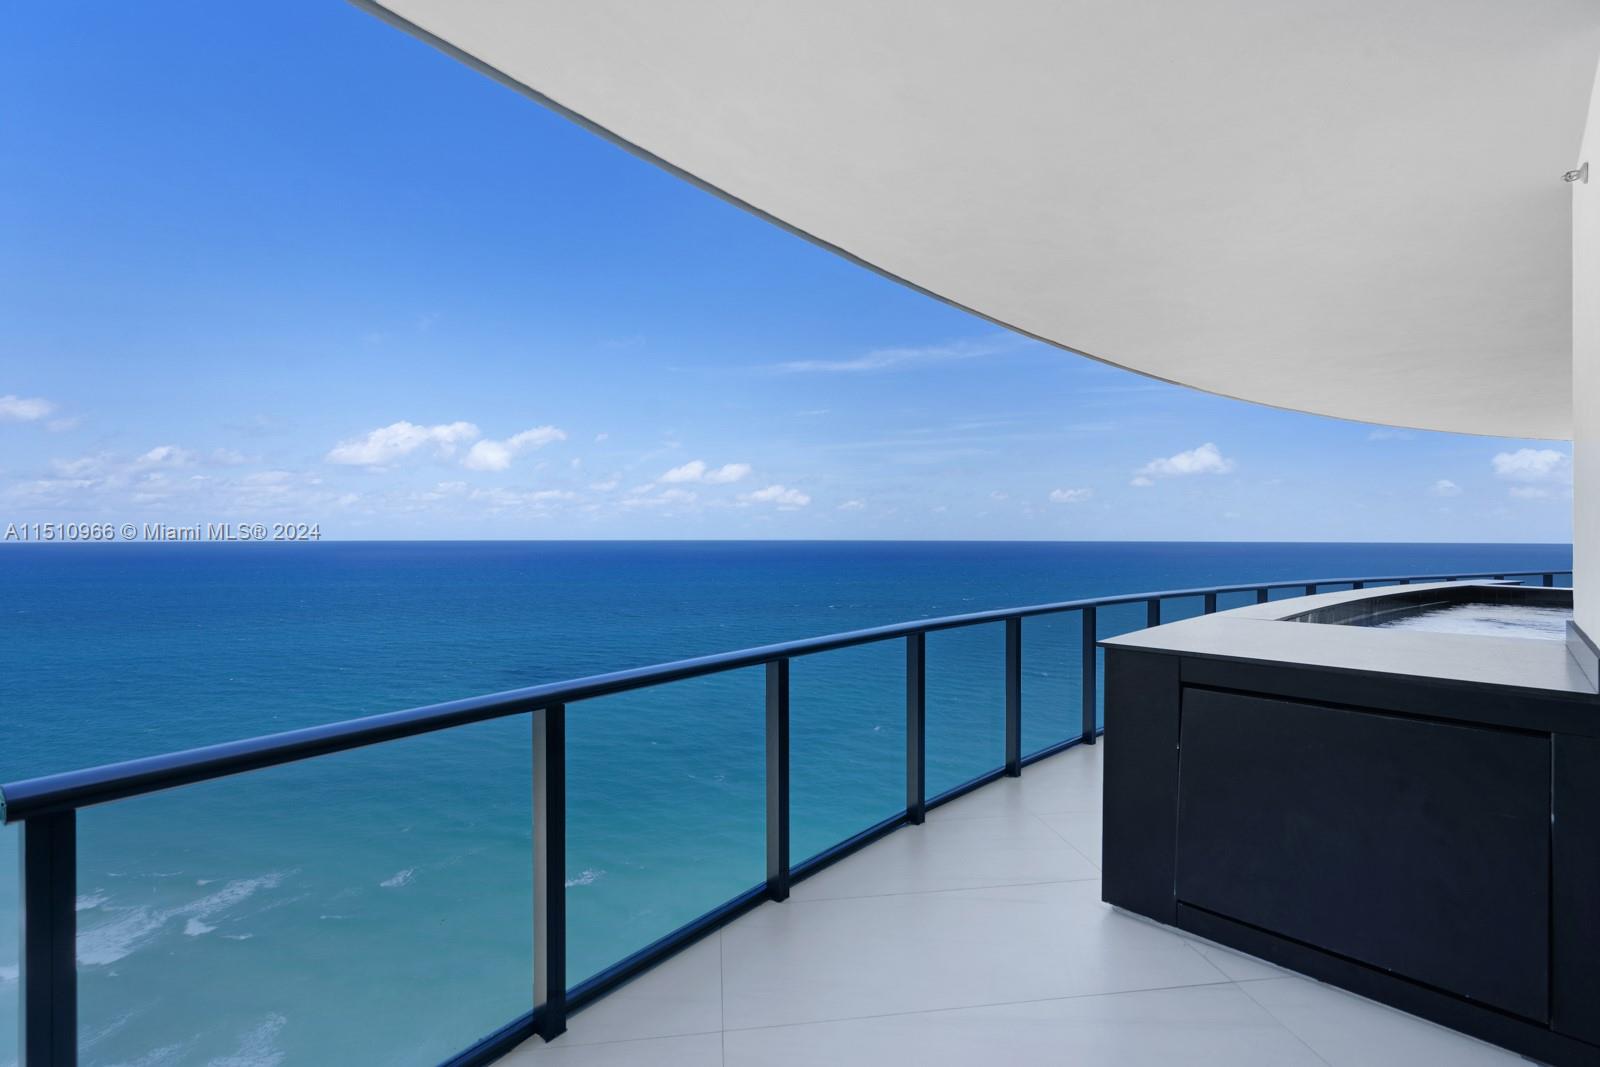 Elevate Your Lifestyle with the jewel of the prestigious Porsche Design Tower. Immerse yourself in panoramic unobstructed views of the Atlantic Ocean and Intracoastal in this breathtaking 3 BR/4.5 BA residence with 3,171 sqft of interior living space with floor-to-ceiling windows, private oversized balcony, summer kitchen and heated saltwater pool-jacuzzi. Custom designed by Steven G featuring Carrara marble floors, Miele appliances, marble countertops, motorized kitchen cabinets, Dornbracht fixtures, large stone spa ensuite bath, marble gas fireplace and custom closet. The Dezervator glass elevator will transport your car up to your in-residence 2-car garage. Five-star amenities include top-tier security, concierge, spa, lobby restaurant/bar and room service. The epitome of Luxury Living.